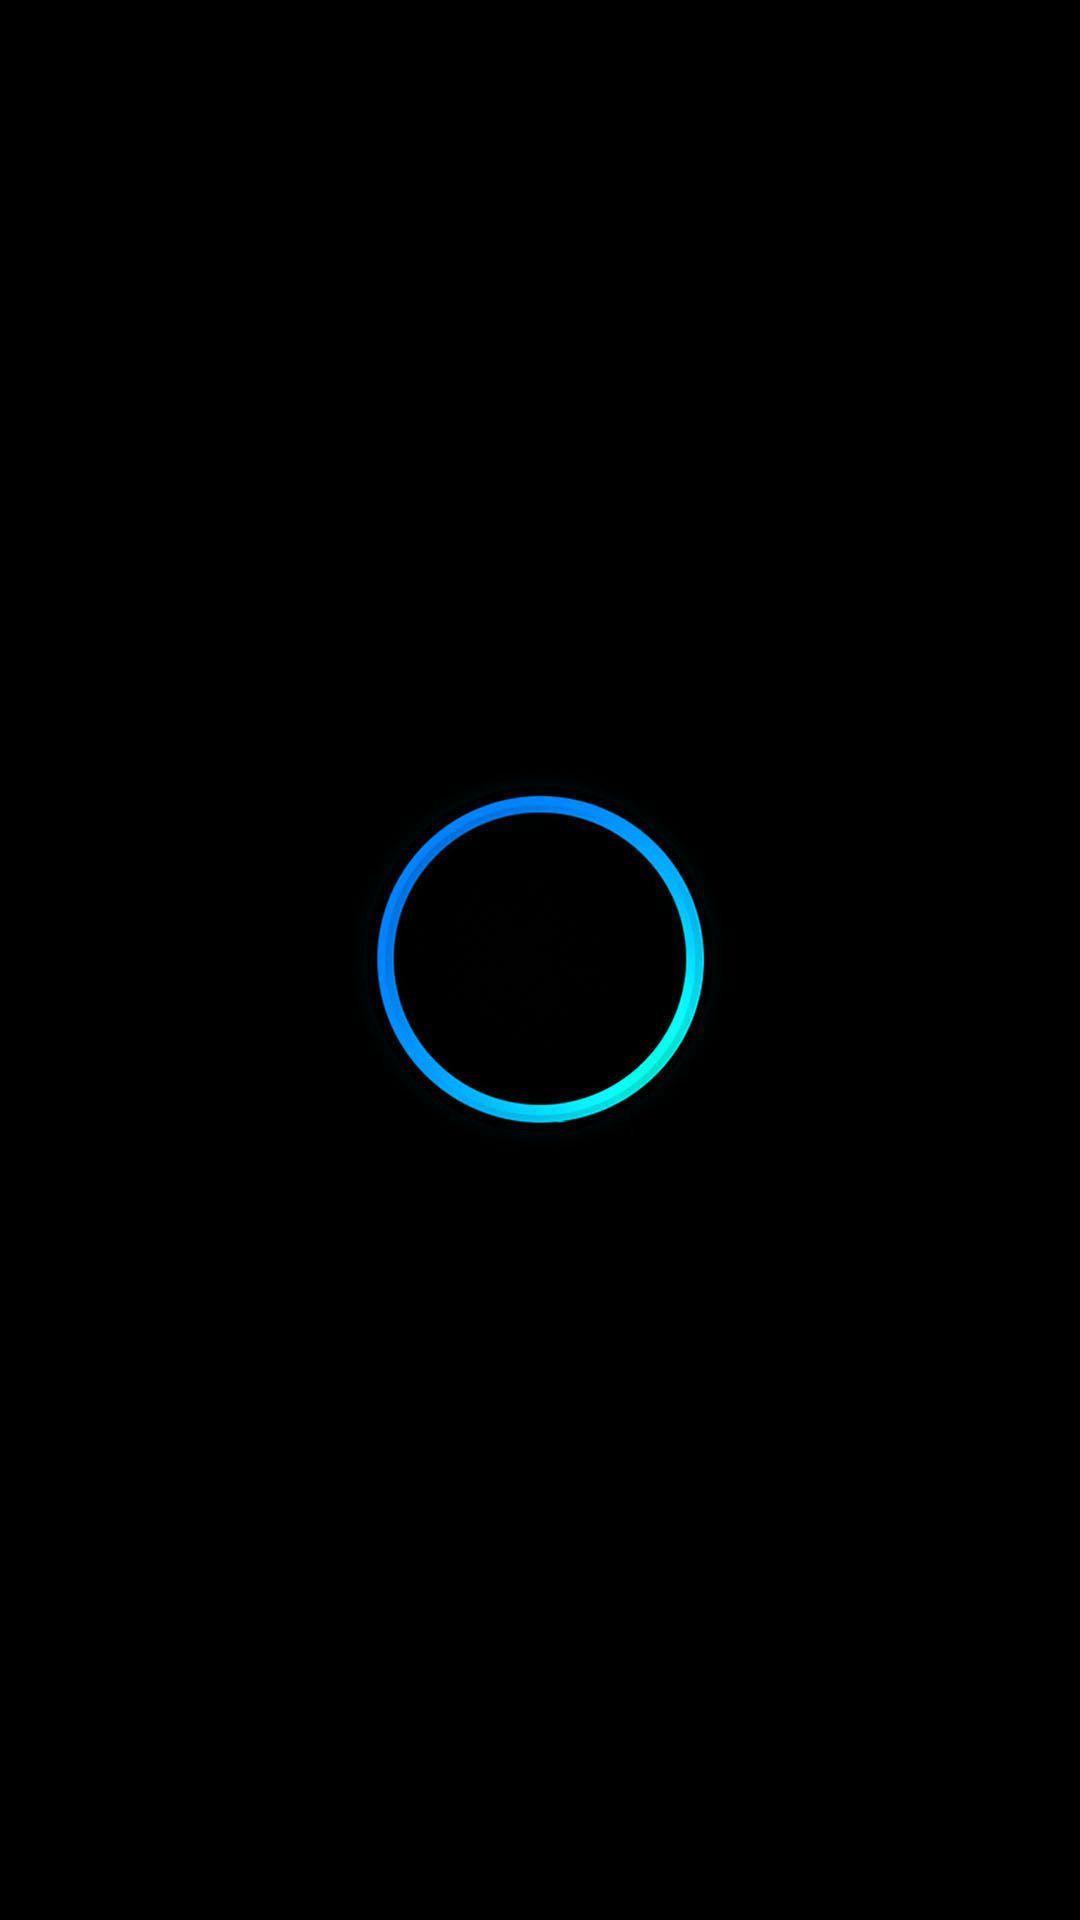 Free download Turquoise Blue Circle Minimal Android Wallpaper download [1080x1920] for your Desktop, Mobile & Tablet. Explore Android Wallpaper Blue Software Download. Android Desktop Wallpaper, Free Wallpaper for Android